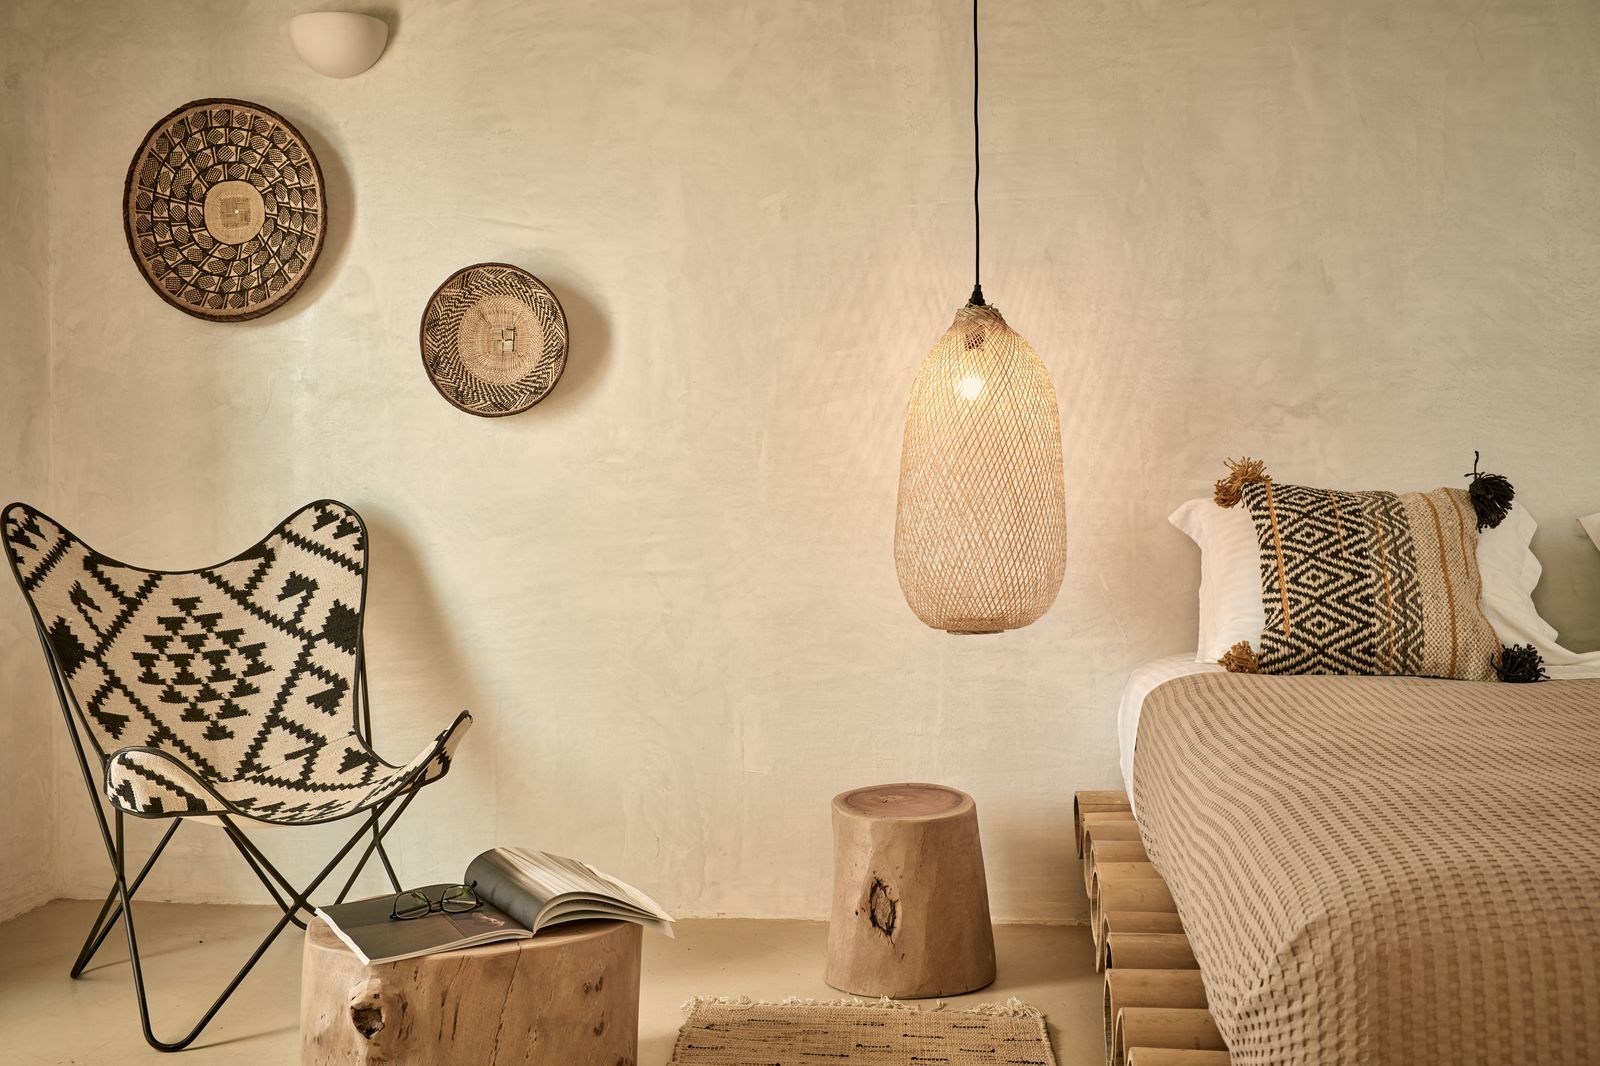 Ambiance-ethnic-chic_Naxian-collection-hotel-Grece_Planete-deco